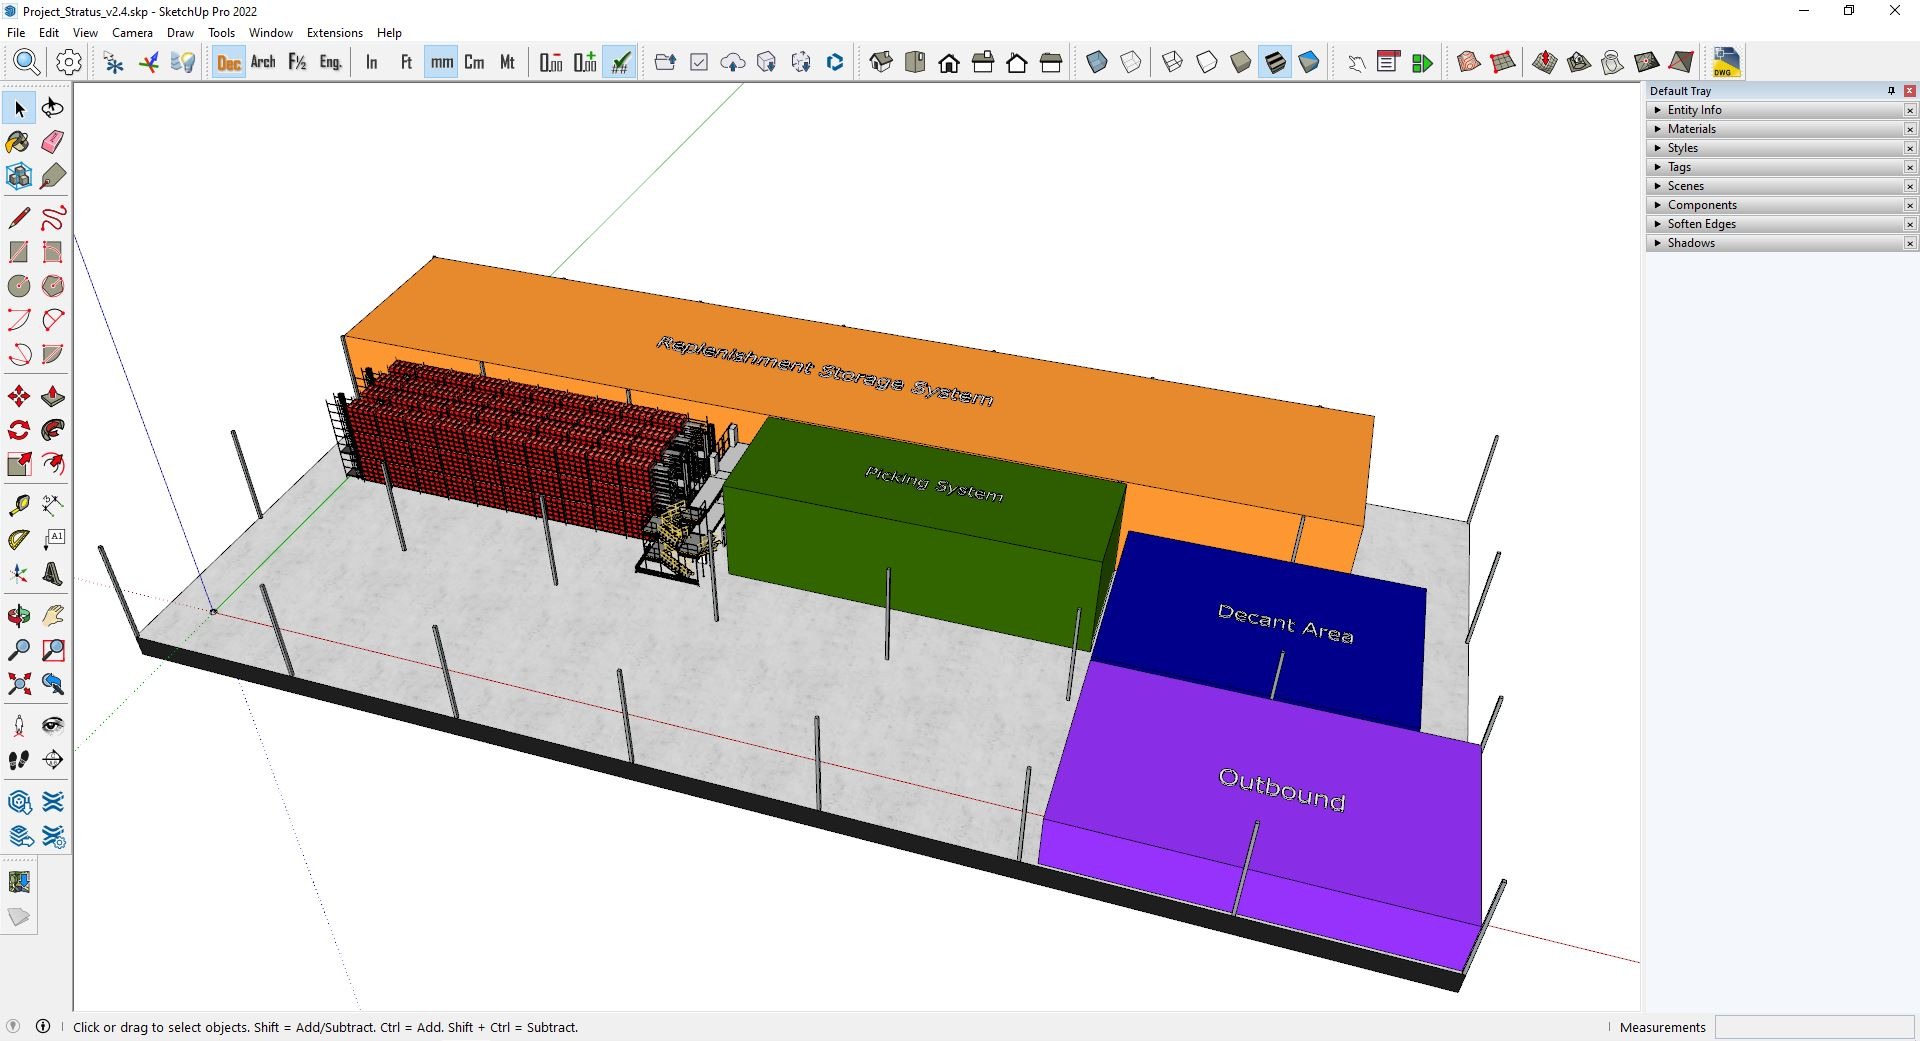 image showing transition from block sizing concept to detailed concept using TGW products.